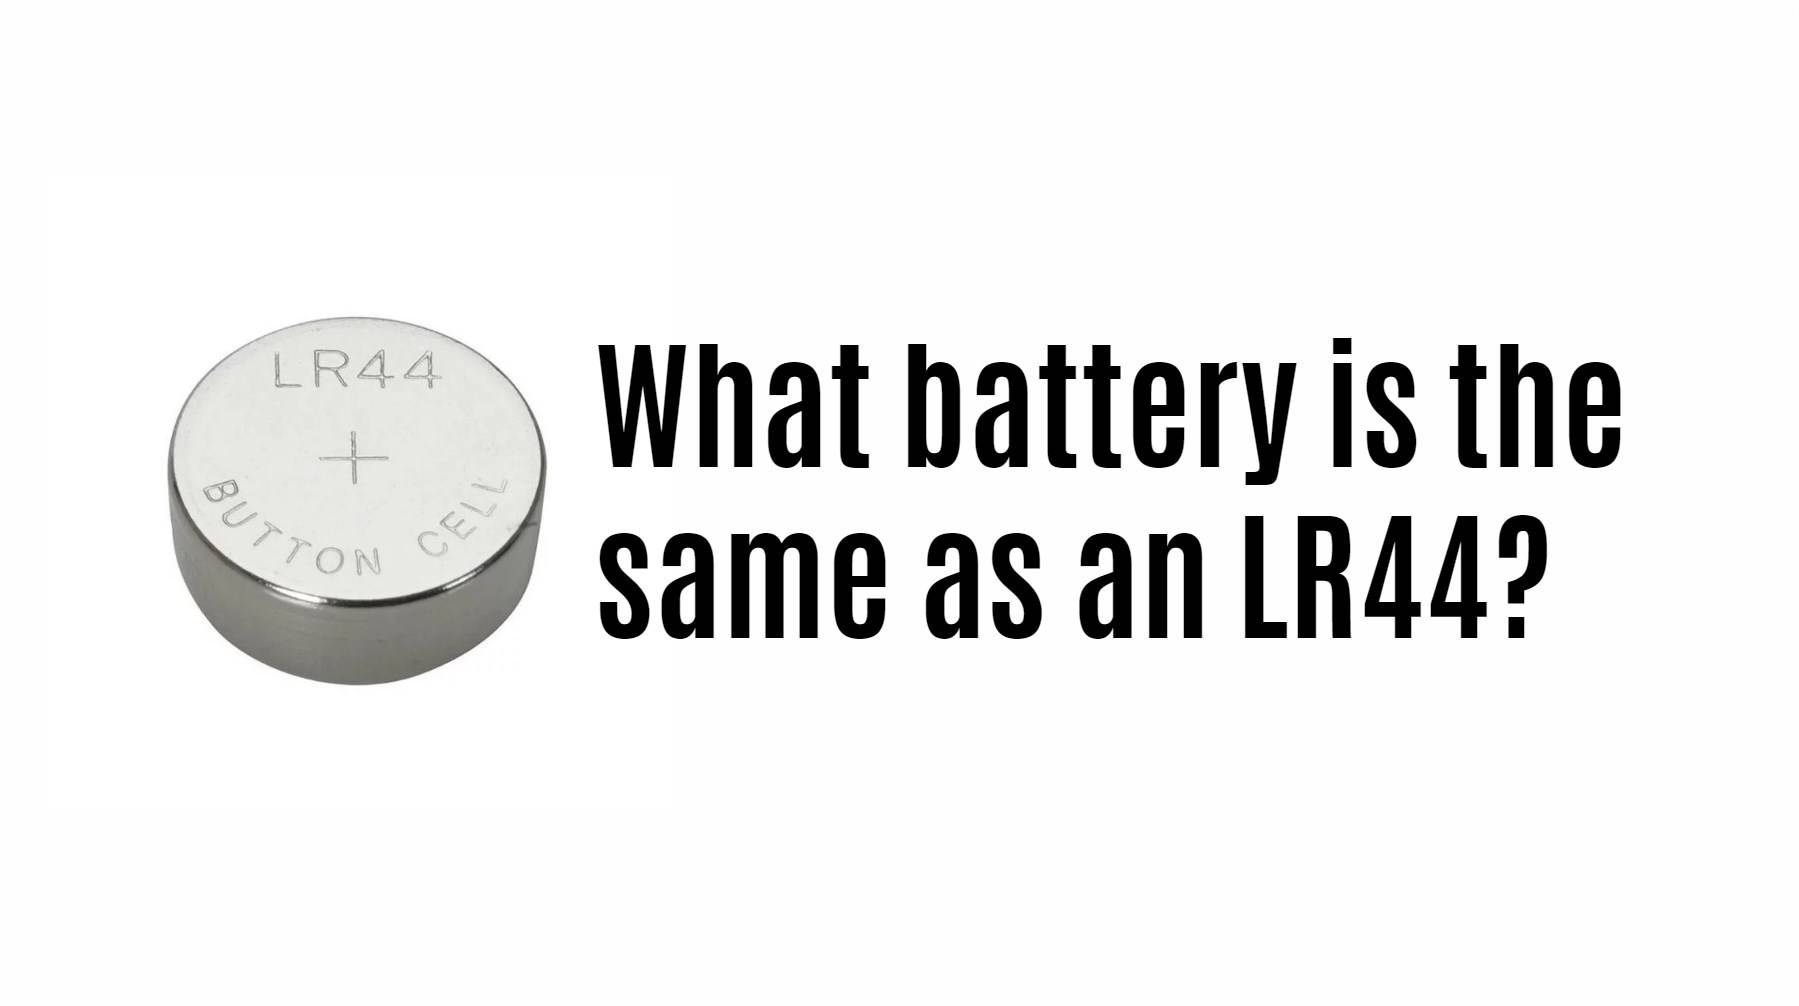 What battery is the same as an LR44?